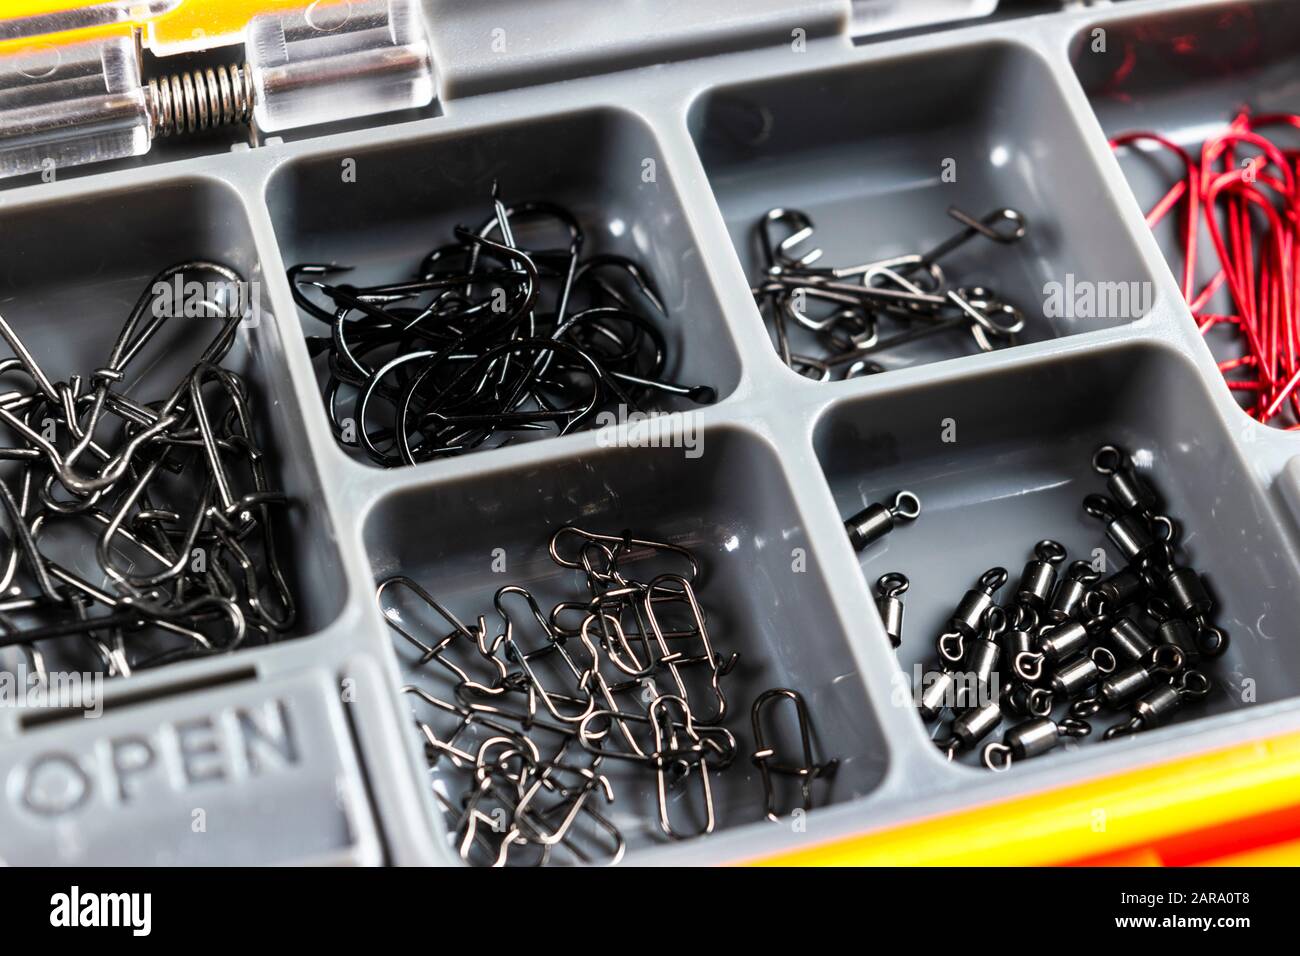 https://c8.alamy.com/comp/2ARA0T8/opened-tackle-box-with-fishing-hooks-and-accessories-fishing-hooks-in-box-sections-case-for-tackle-elements-fishing-accessories-background-close-up-2ARA0T8.jpg